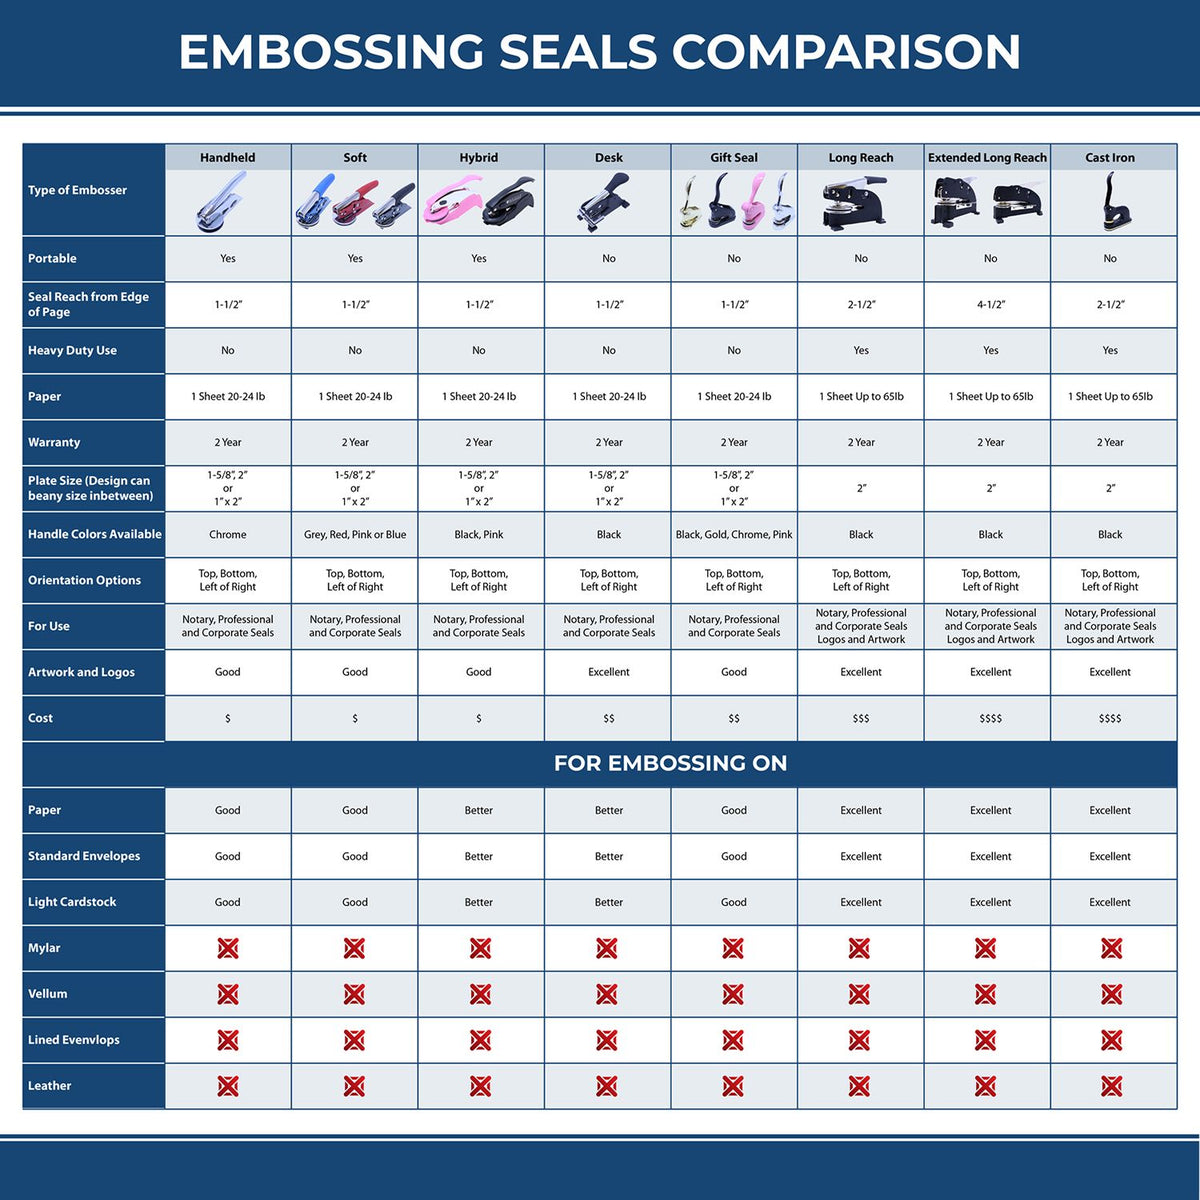 A comparison chart for the different types of mount models available for the Maryland Desk Surveyor Seal Embosser.